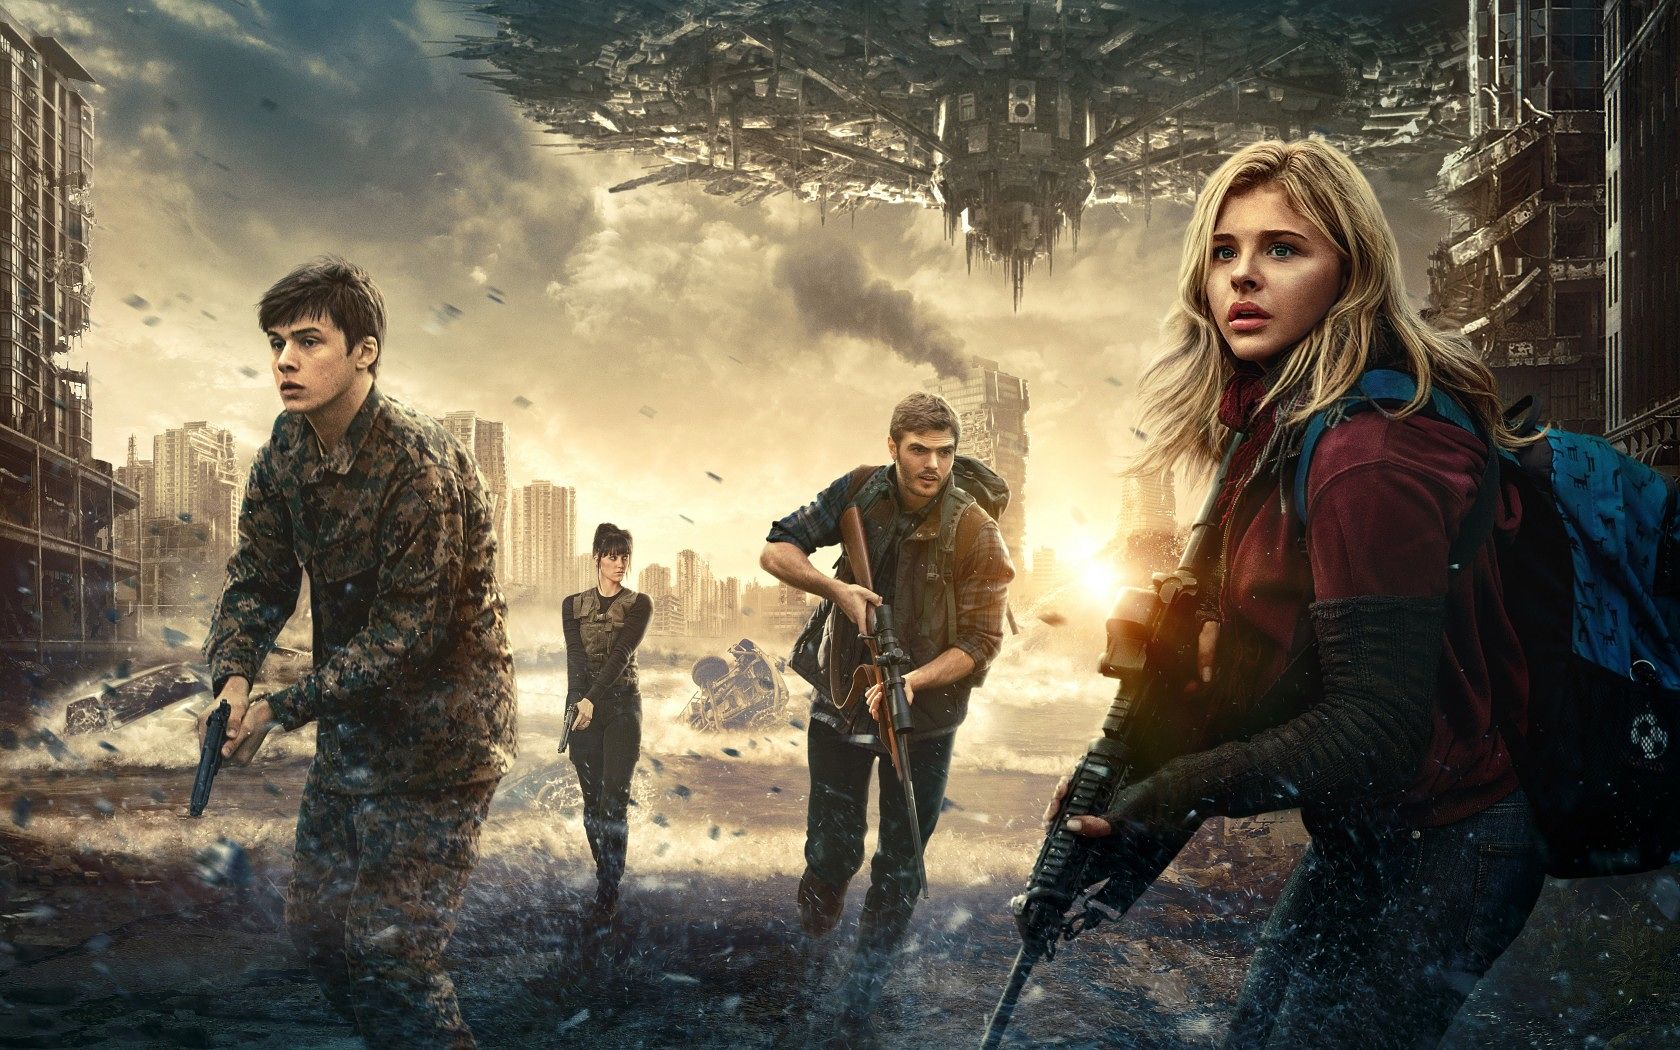 The 5th Wave #1